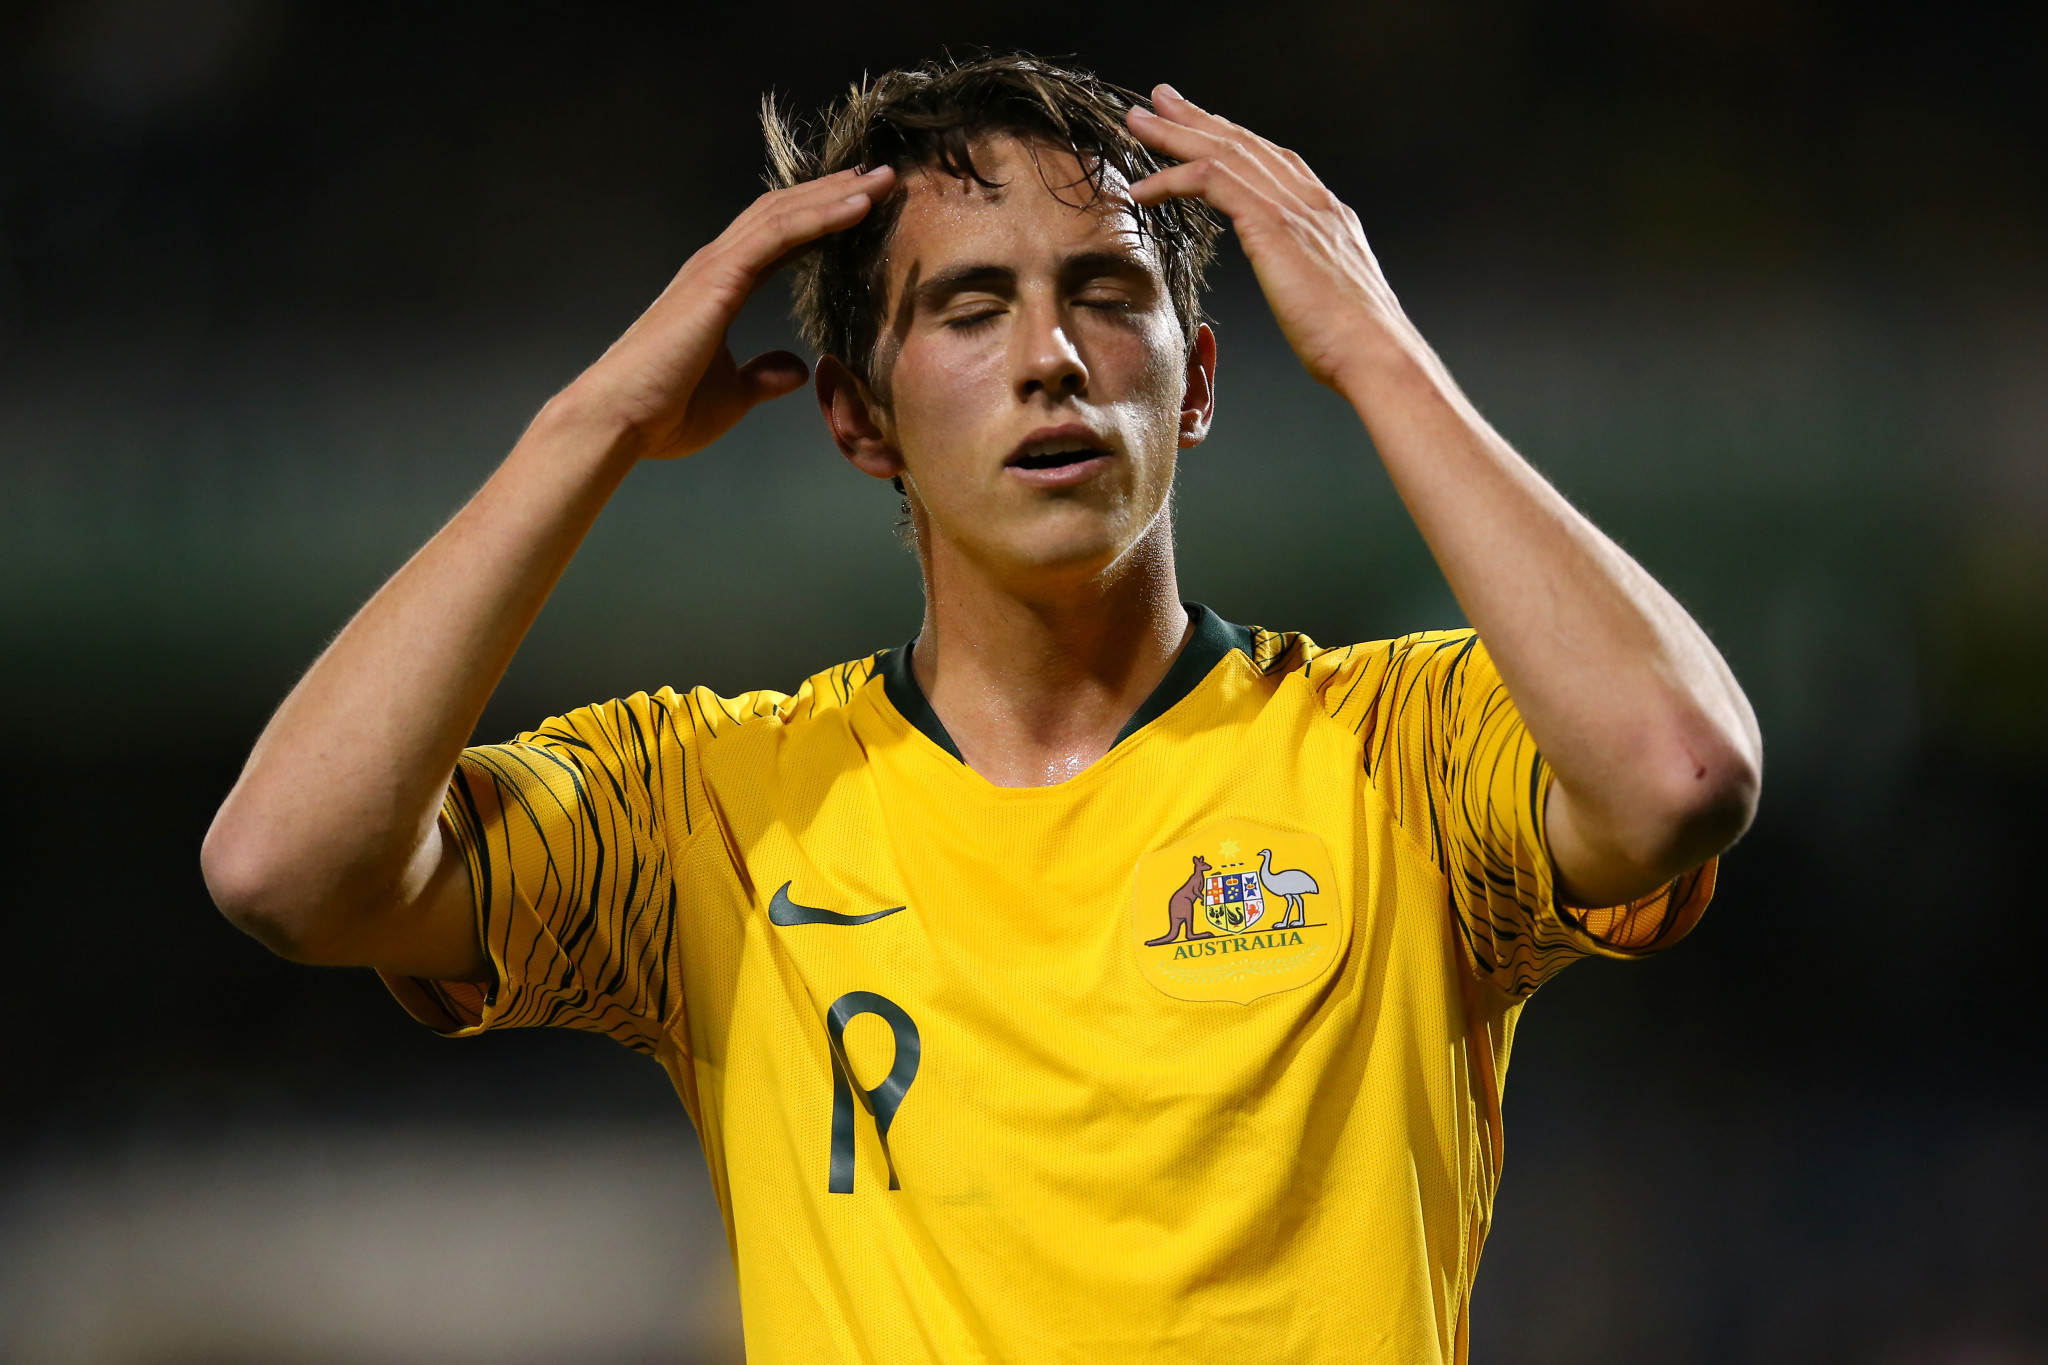 Lachlan Wales is one of three players on Australia's under-23 football team to be banned from taking part in the Tokyo 2020 Olympic Games ©Getty Images